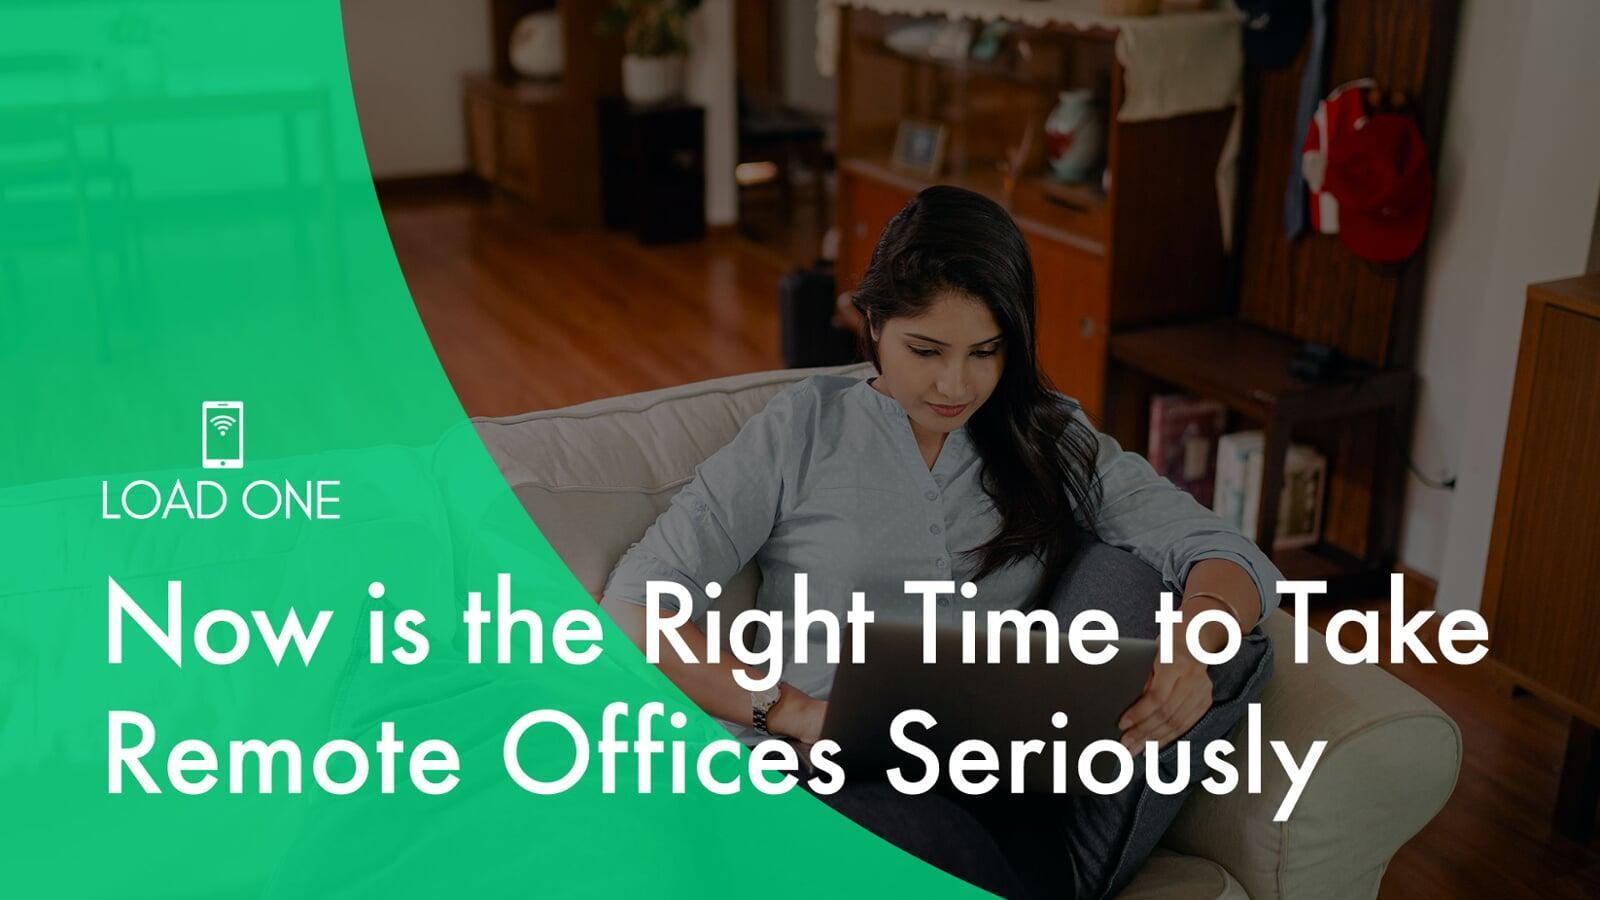 Now is the Right Time to Take Remote Offices Seriously